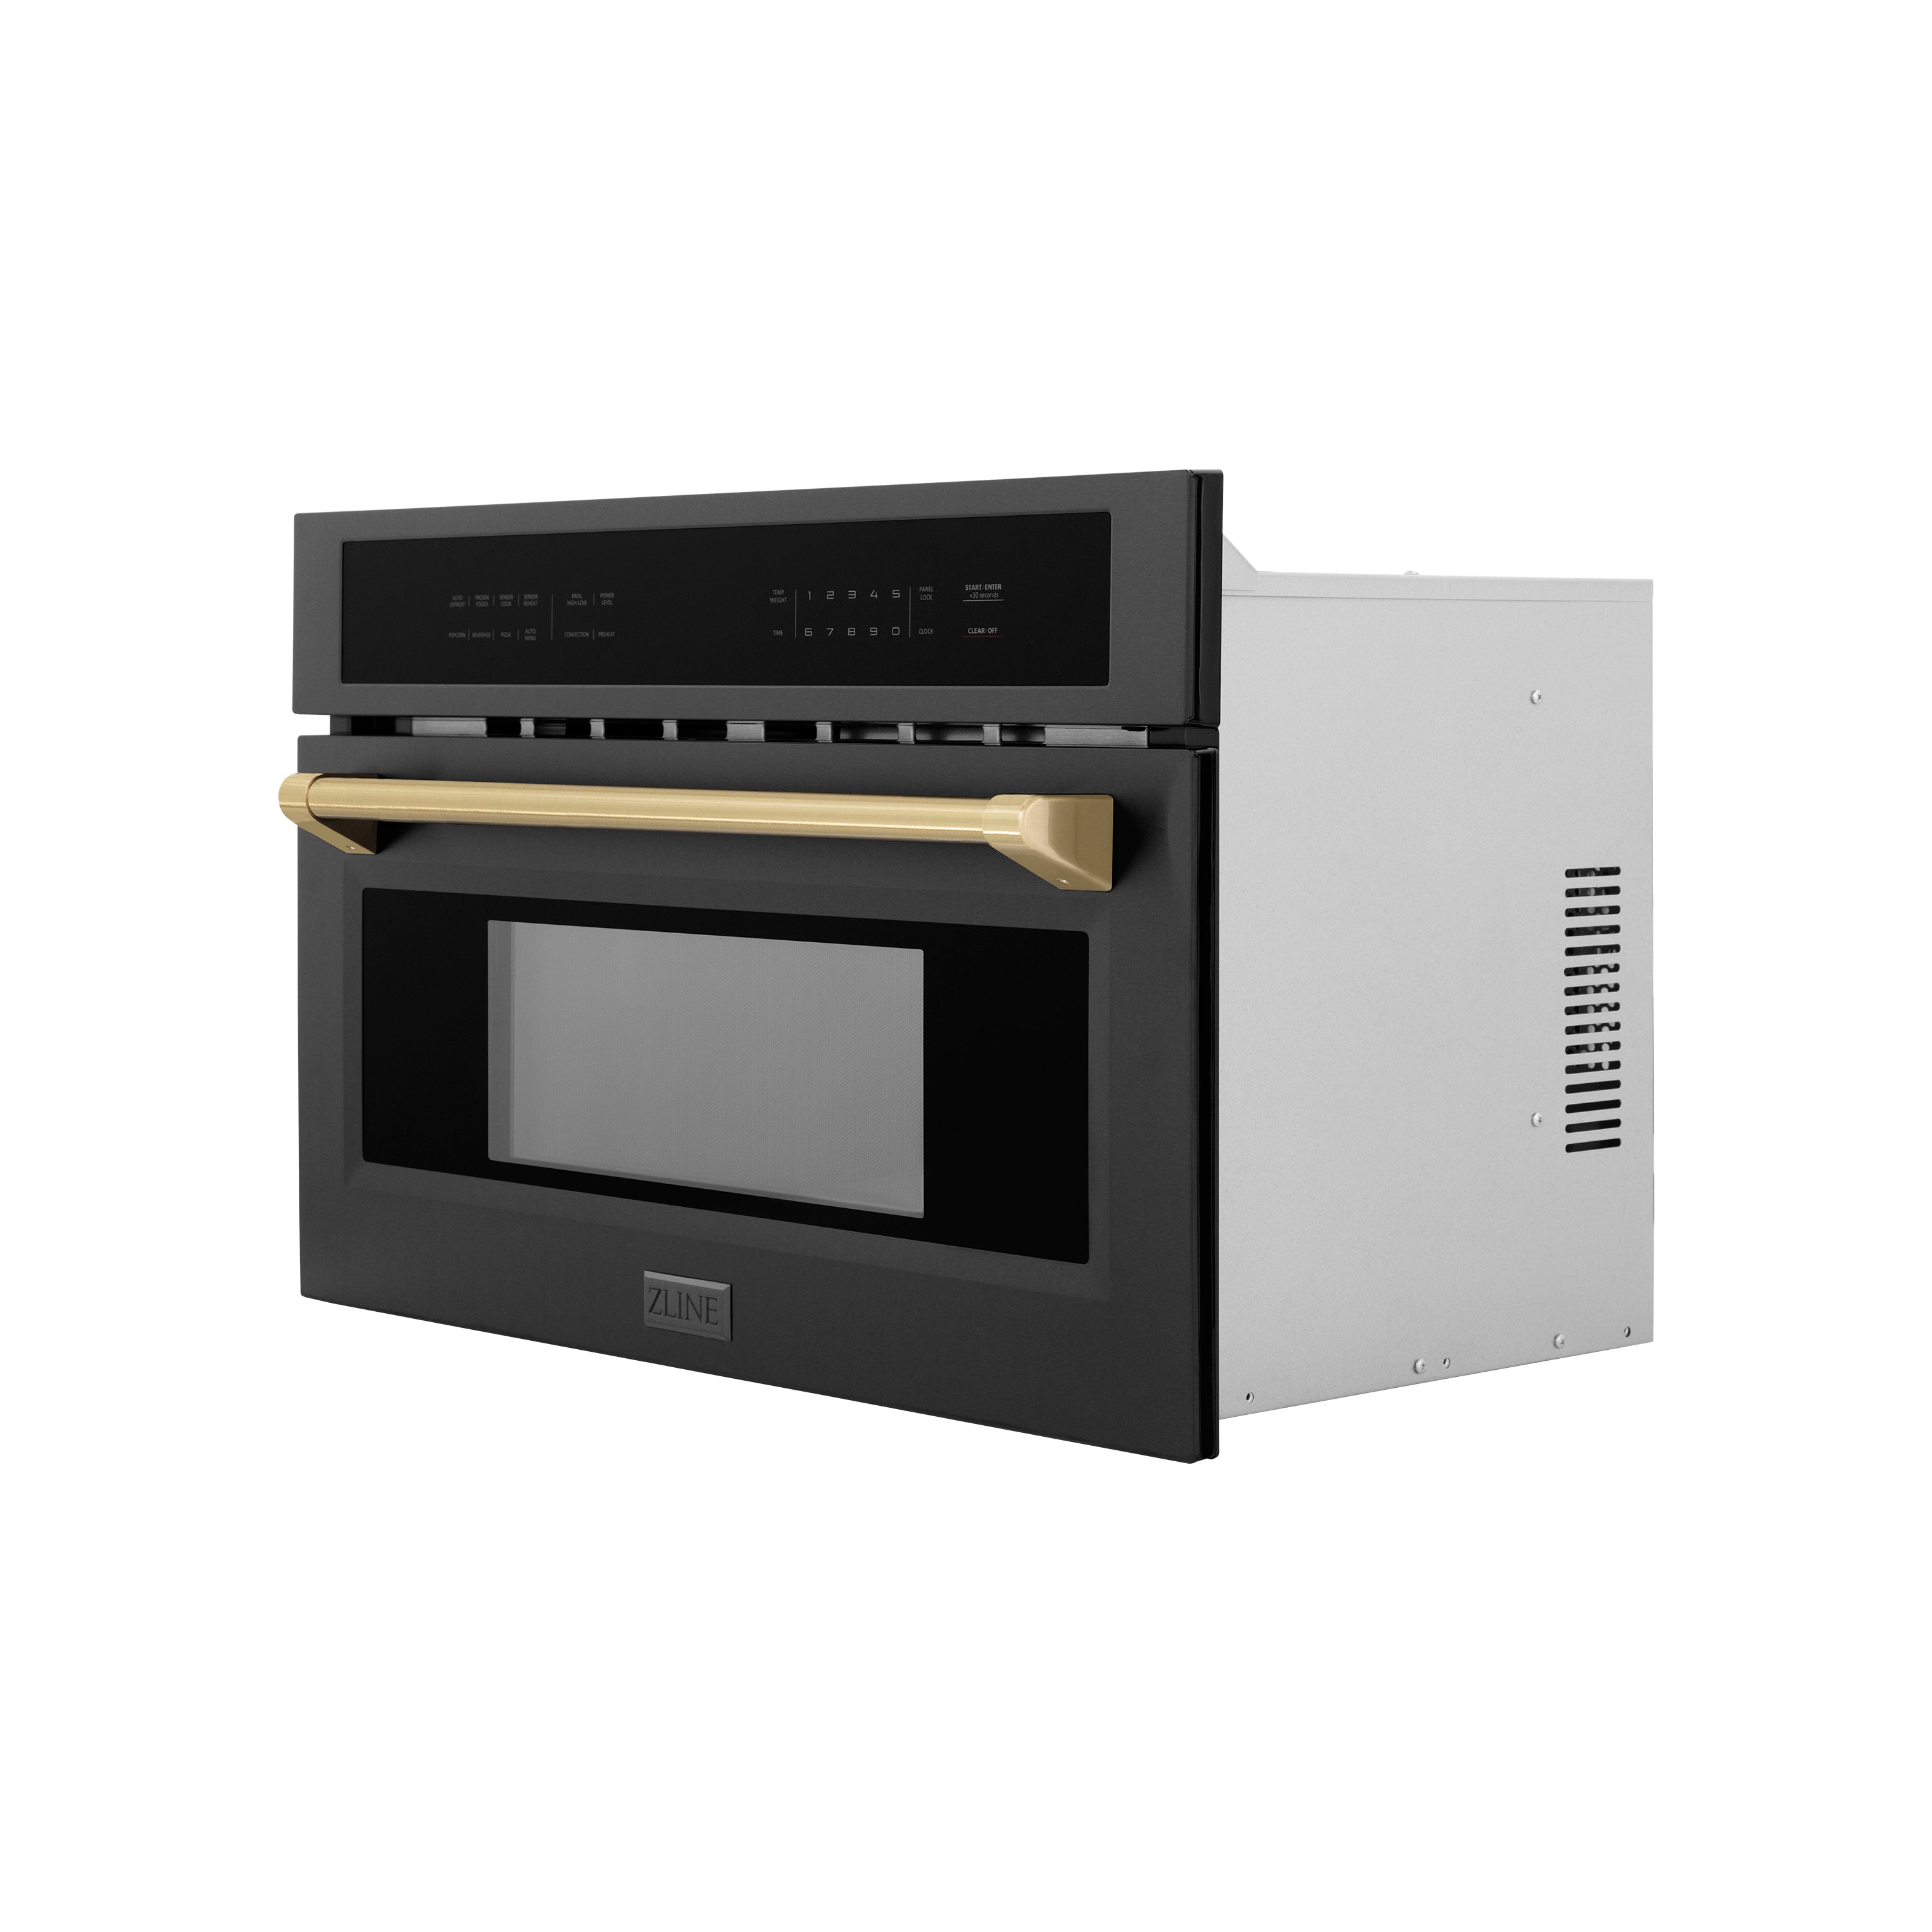 ZLINE Autograph Edition 30” 1.6 cu ft. Built-in Convection Microwave Oven in Black Stainless Steel and Champagne Bronze Accents